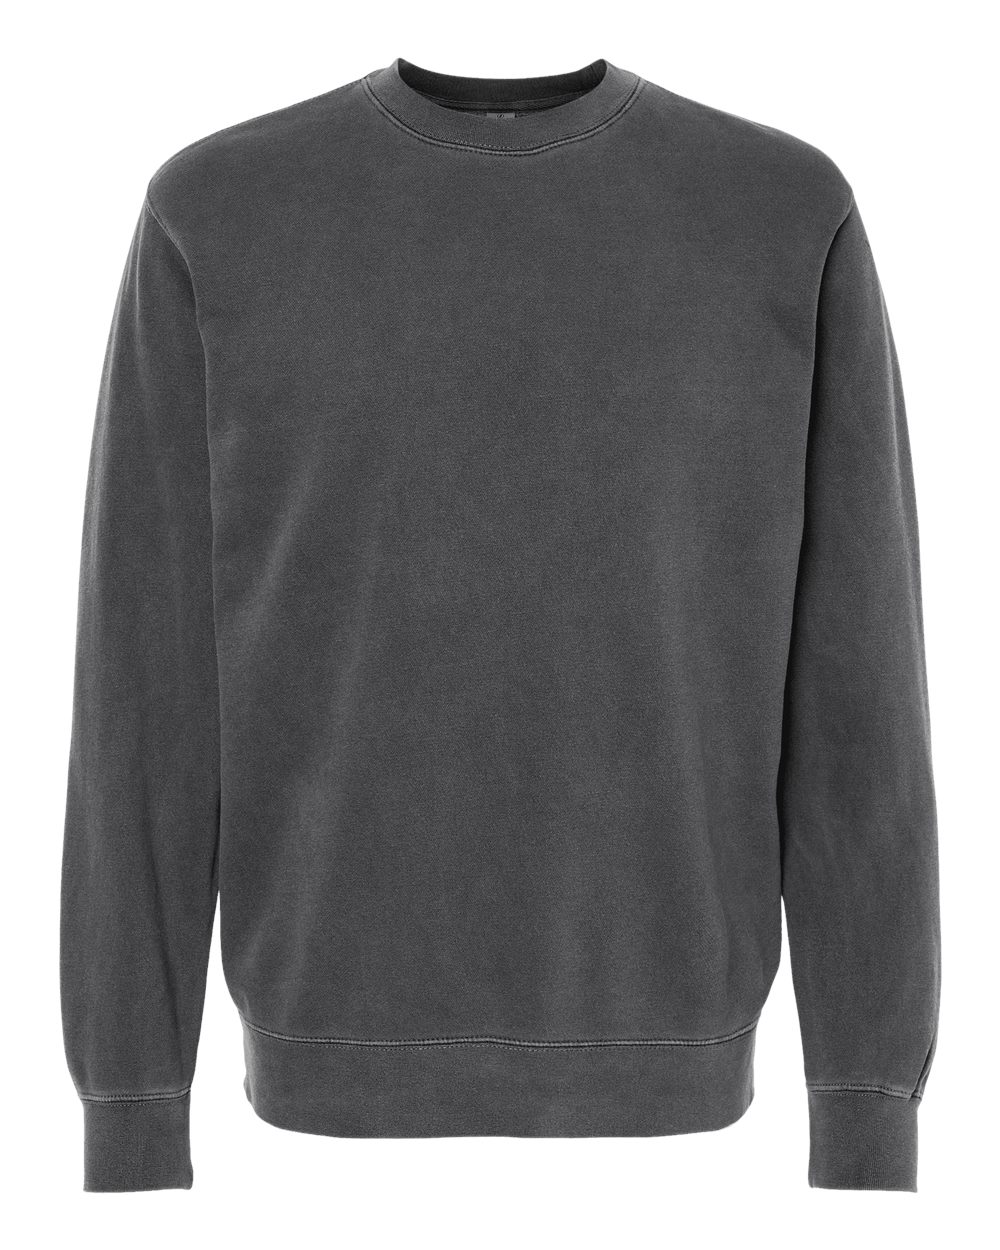 Independent Trading Co Mens Heavyweight Pigment-Dyed Sweatshirt PRM3500 ...